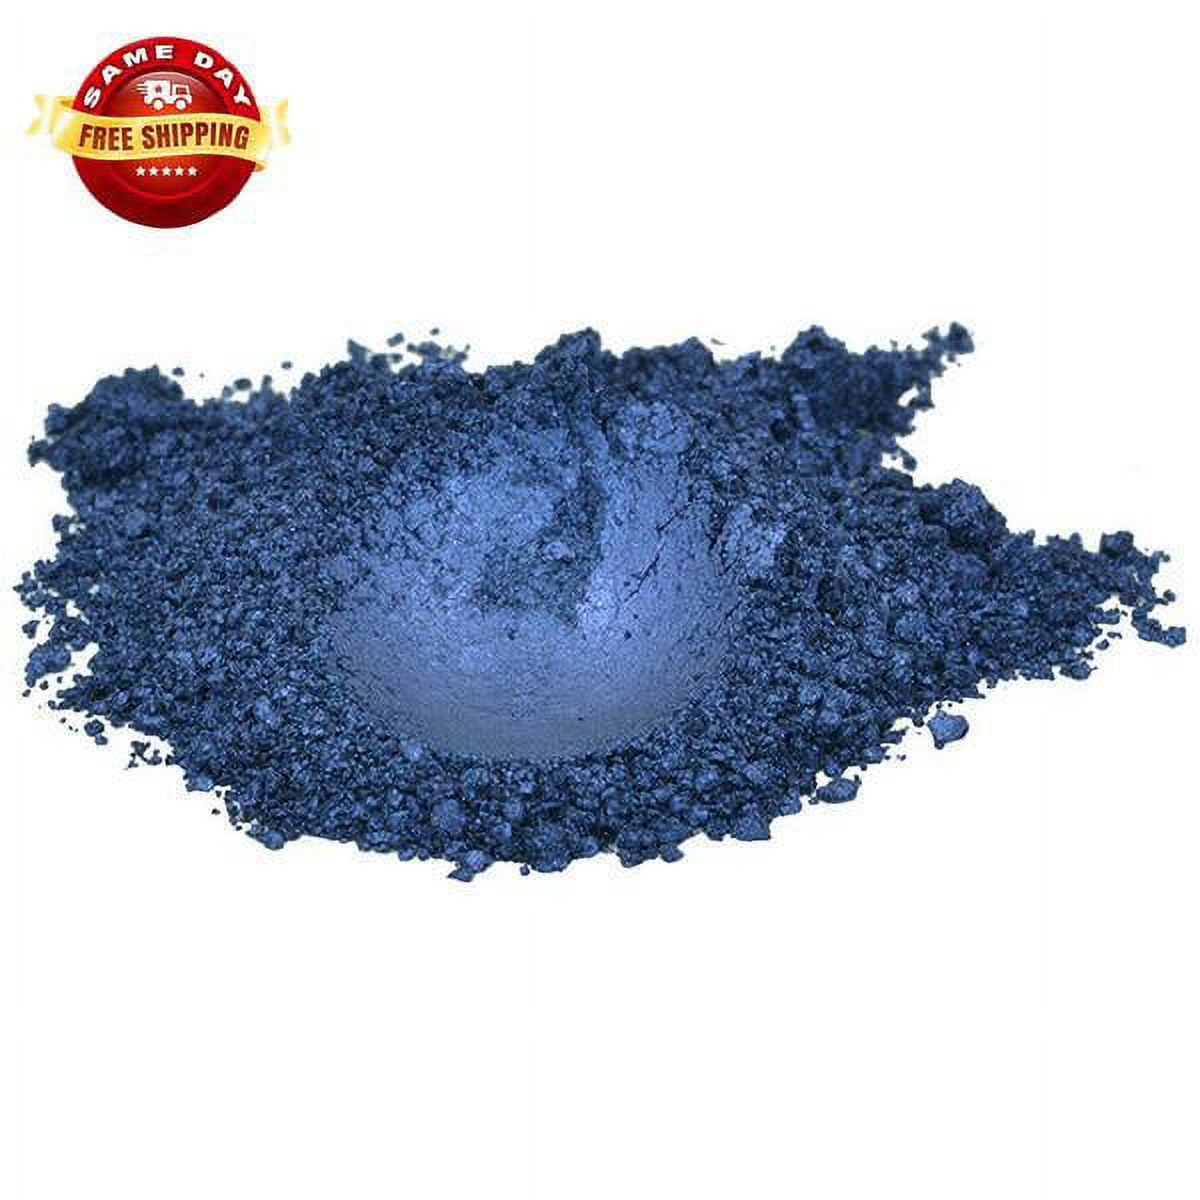 Marblers MARBLERS Cosmetic Grade Natural Mica Powder [Fine Navy